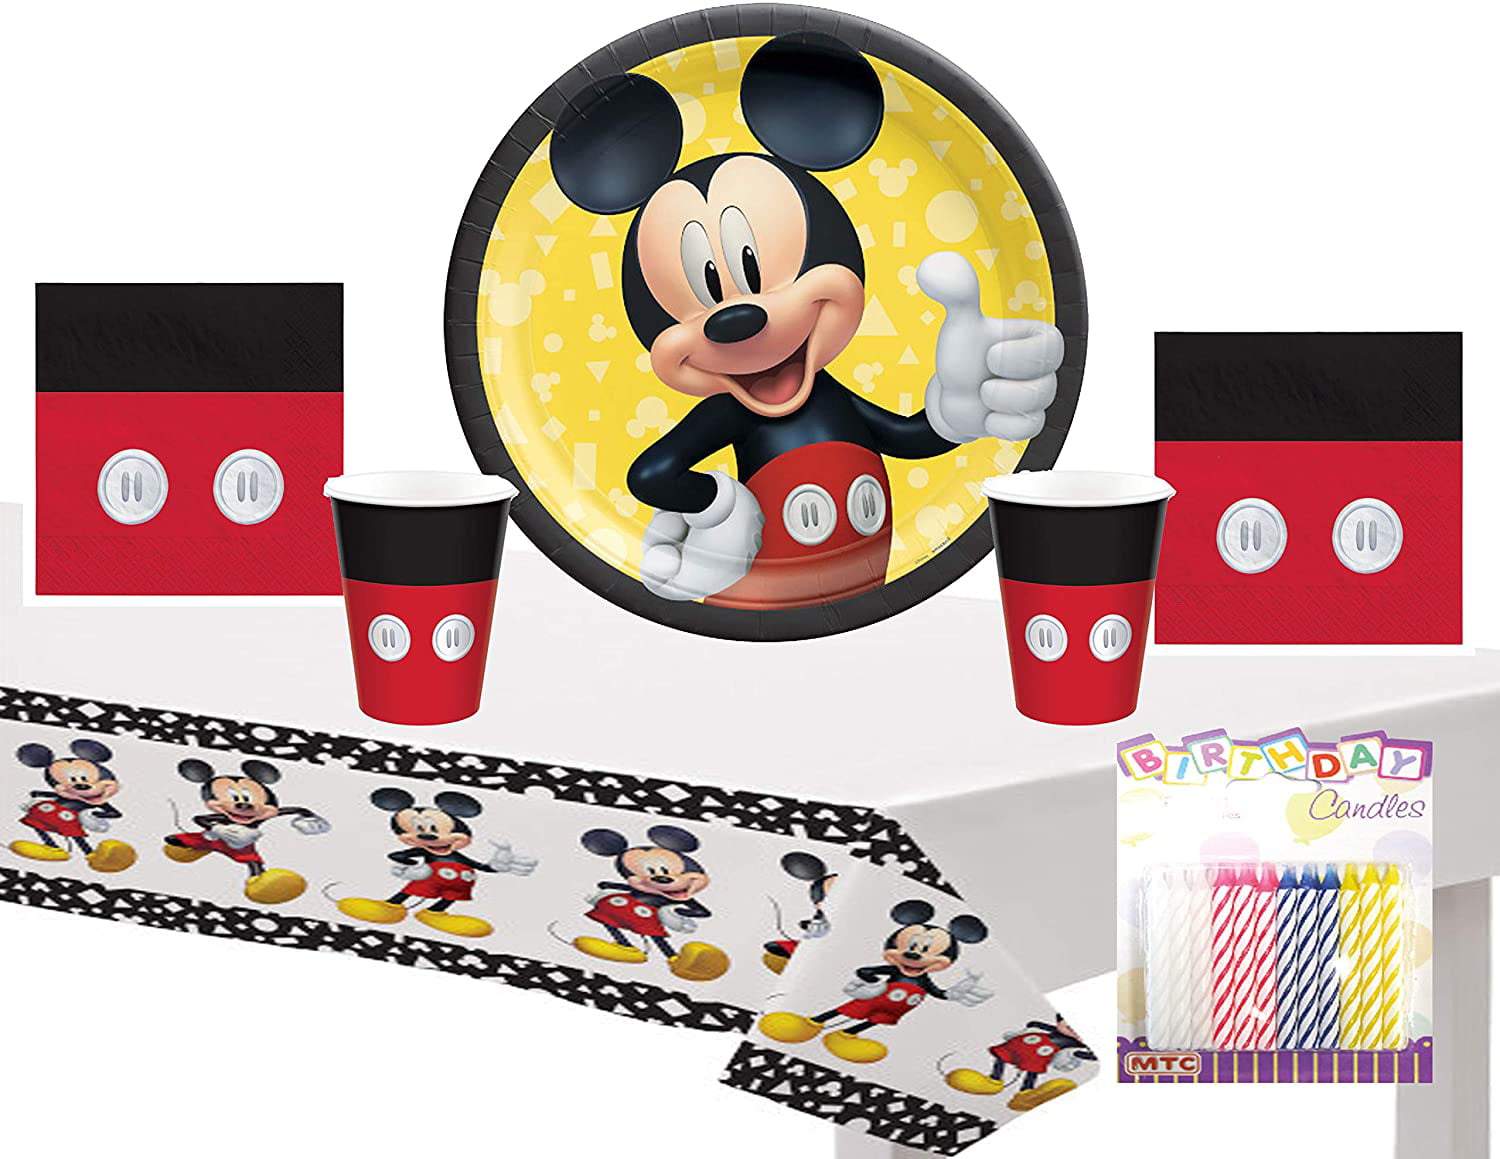 Mickey Mouse Forever Party Supplies Pack Serves 16 Bundle for 16 Dinner Plates Luncheon Napkins Cups and Table Cover with Birthday Candles